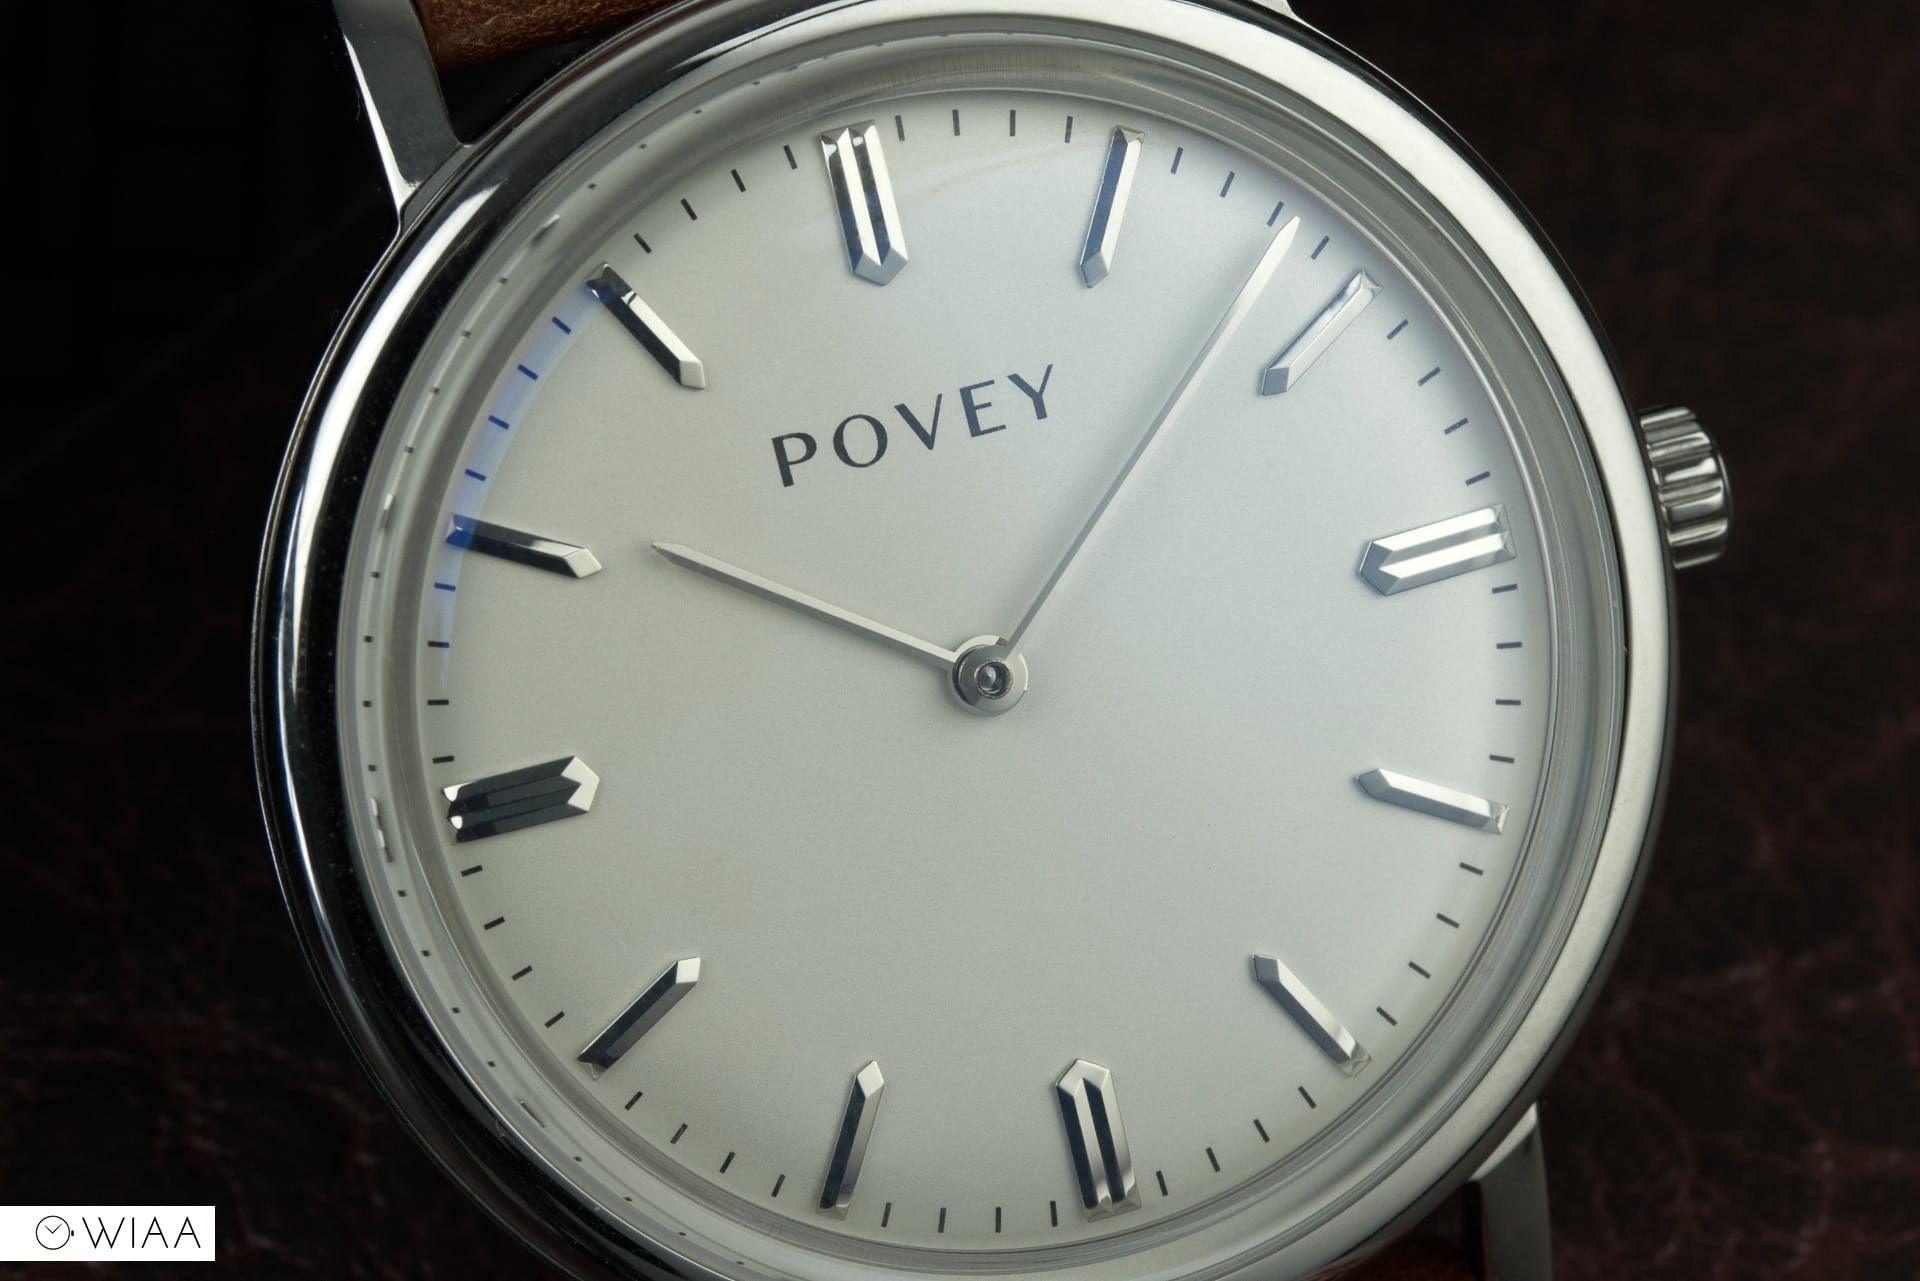 Povey Albion Watch Review